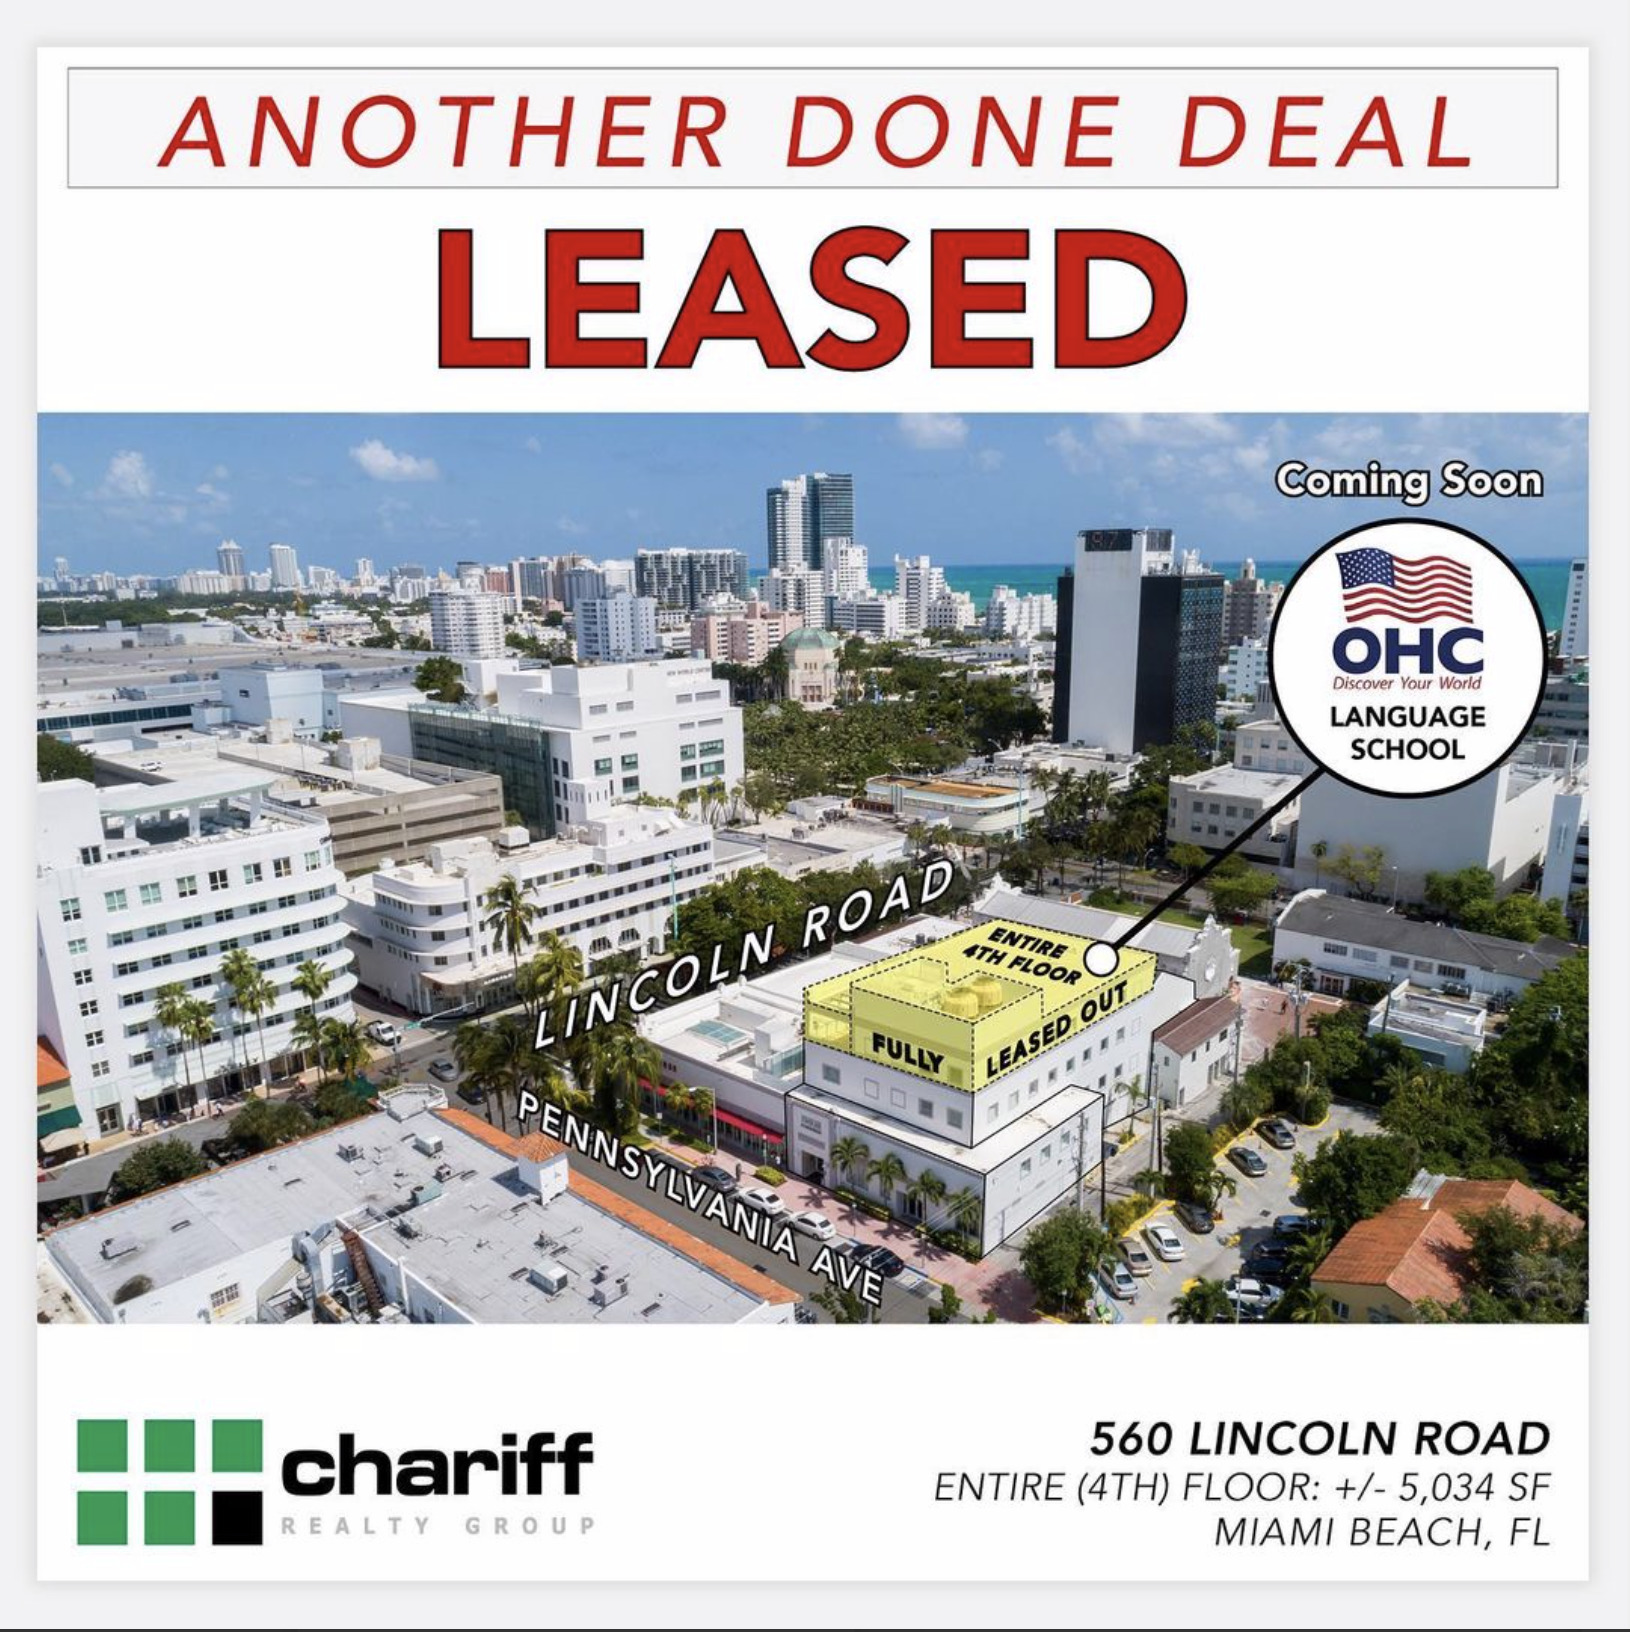 560 Lincoln Road - Another Done Deal - LEASED - Miami Beach - Florida 33139 - Chariff Realty Group